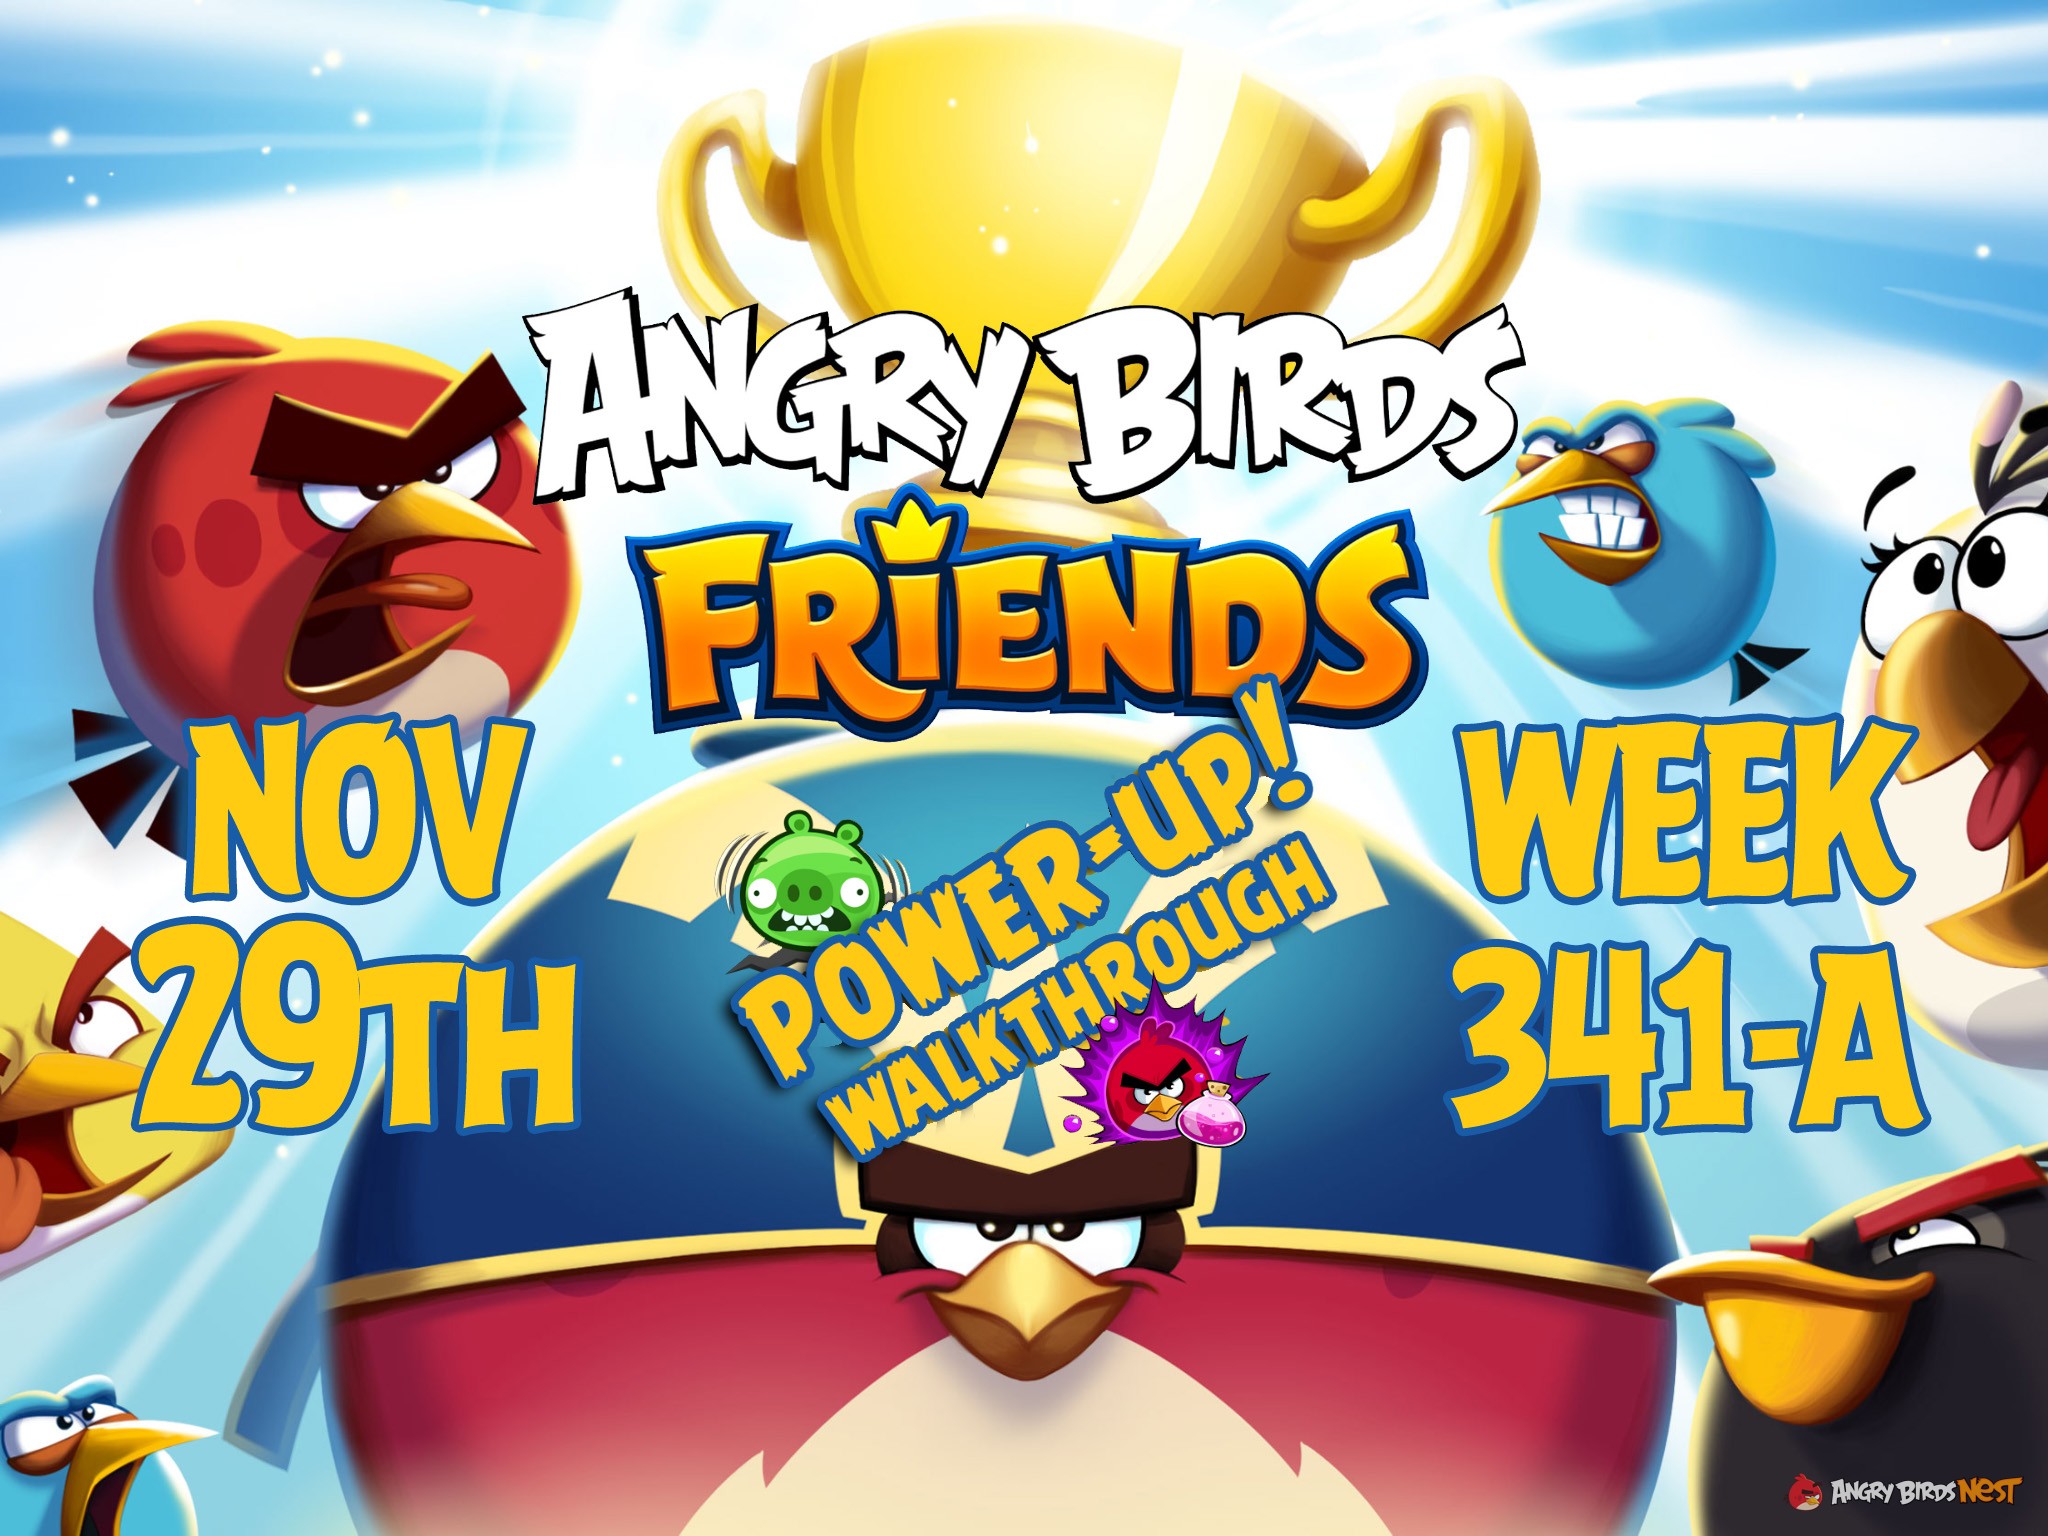 Angry-Birds-Friends-Tournament-Week-341-A-Feature-Image-PU